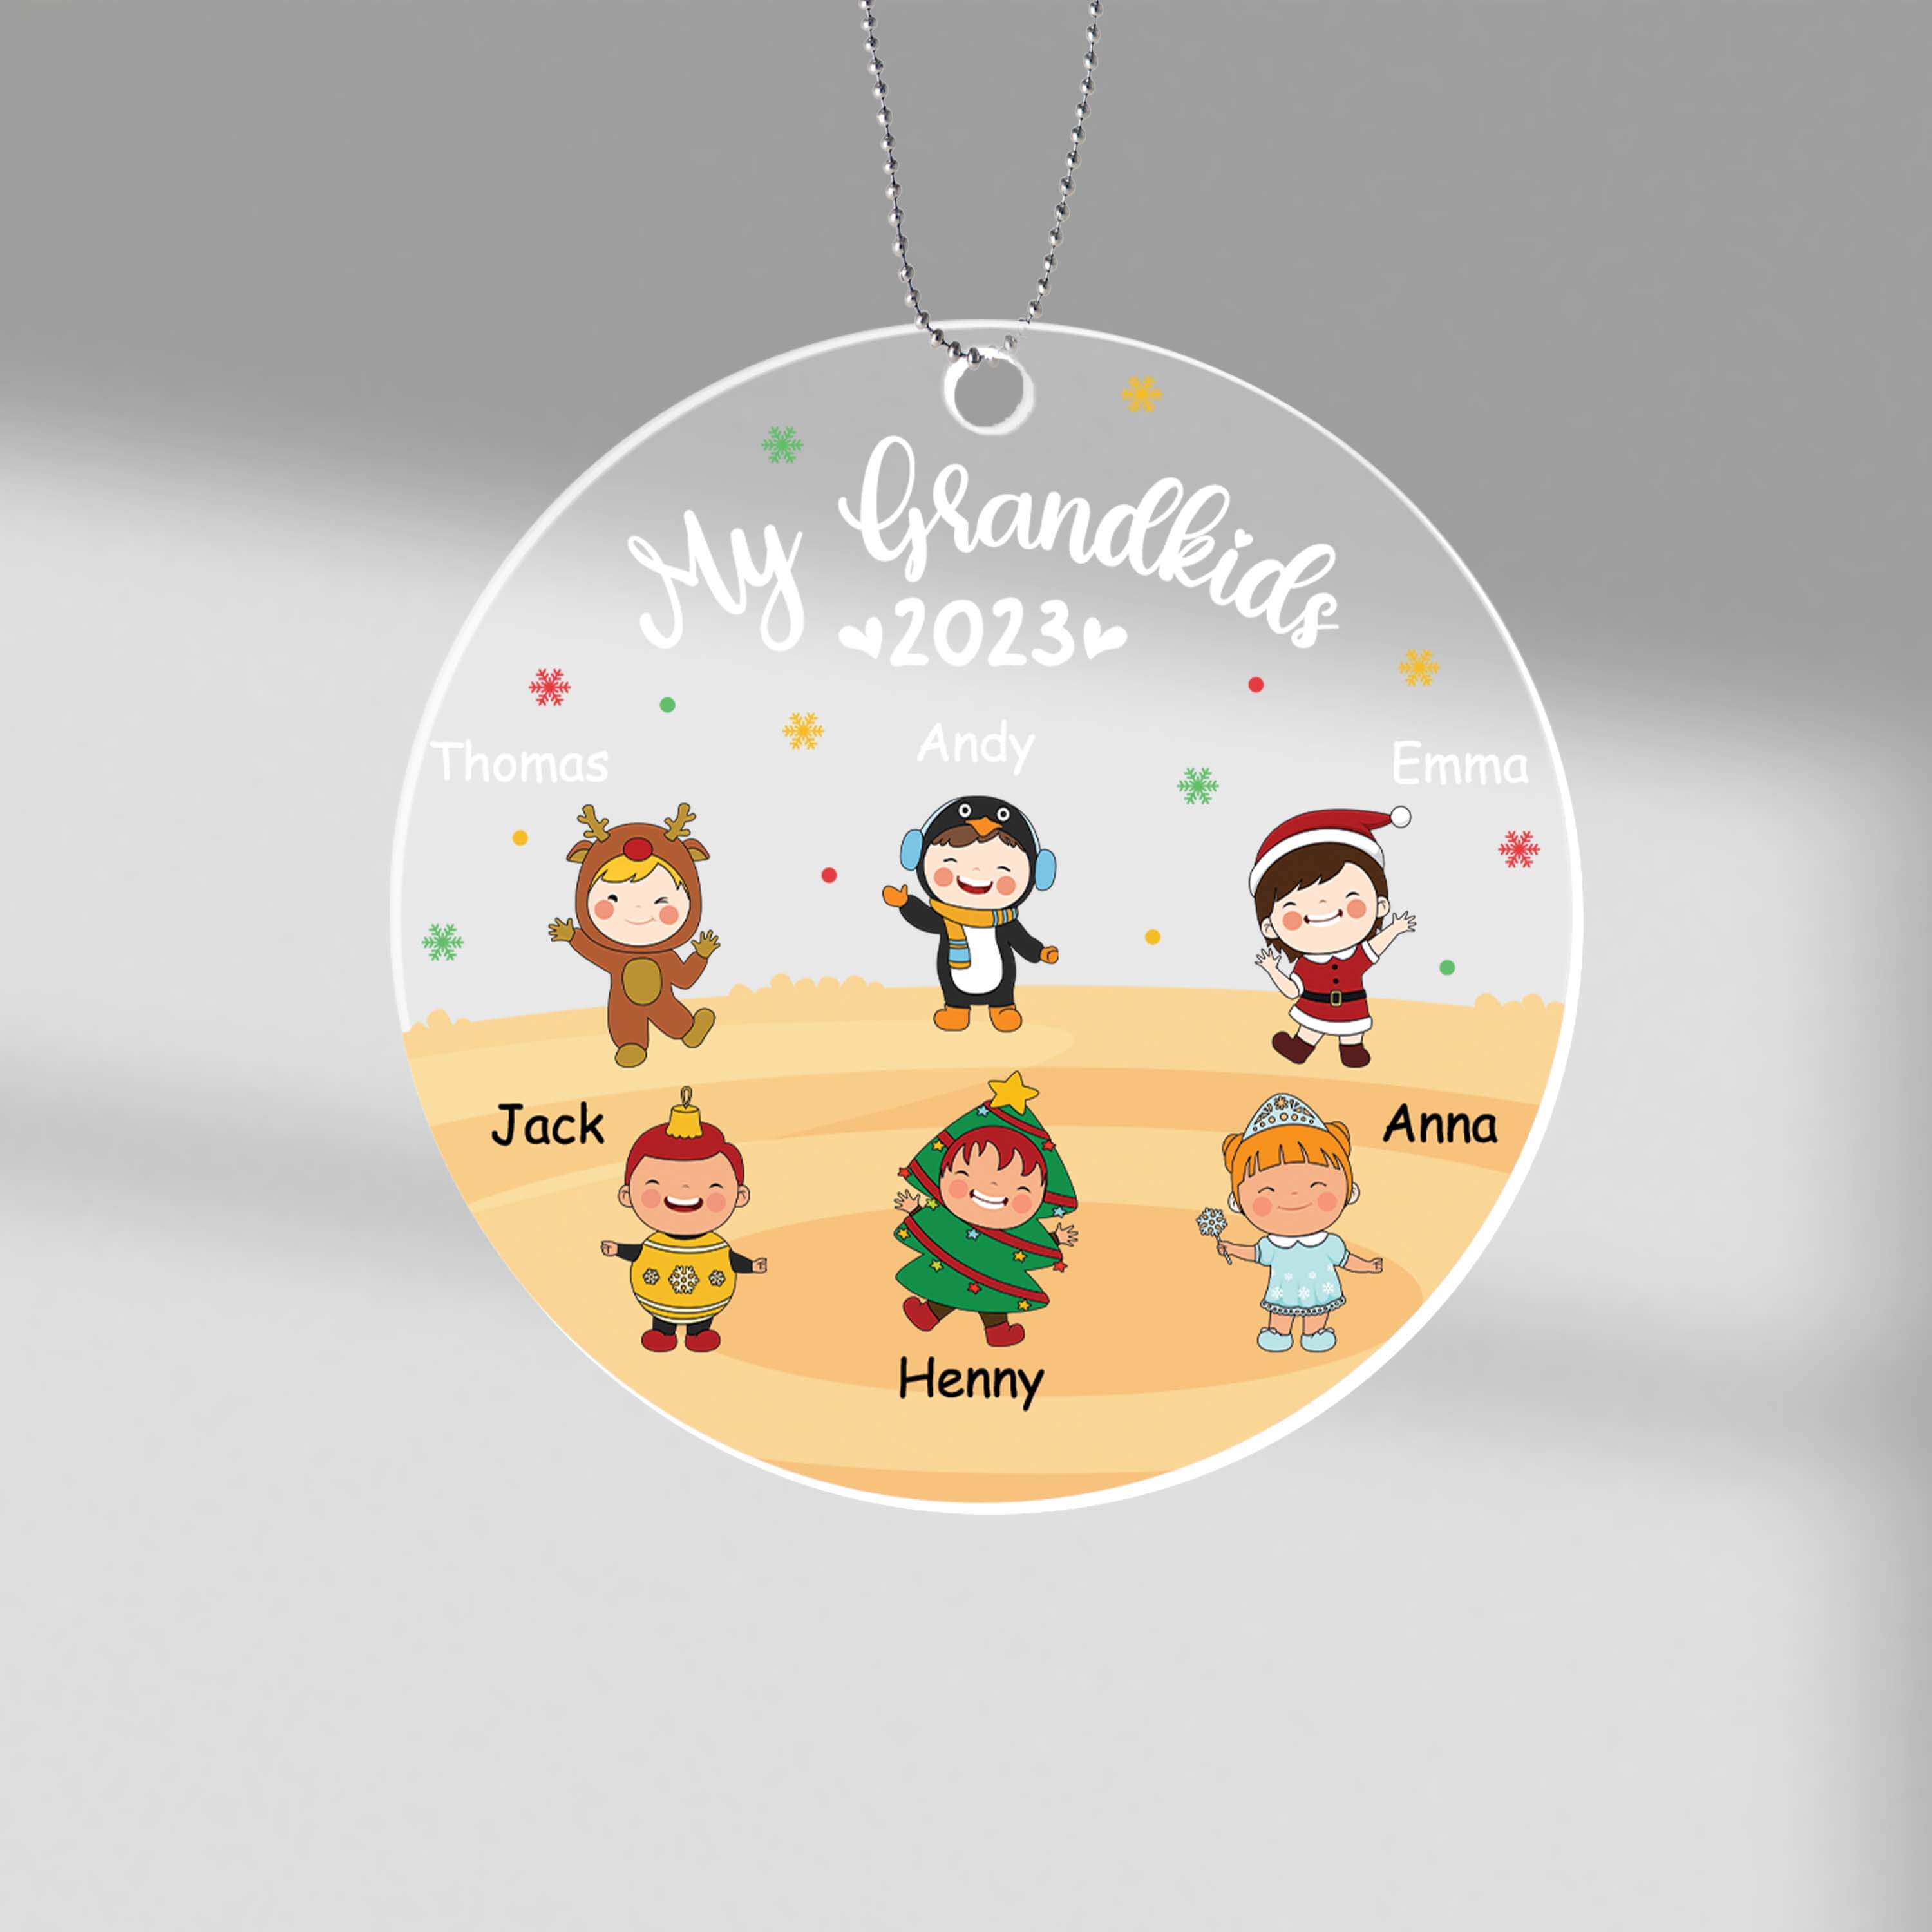 1489AUS1 personalized our grandkids family christmas ornament_7132bbb6 ab3a 41e7 bf24 5ba5dccdf58f